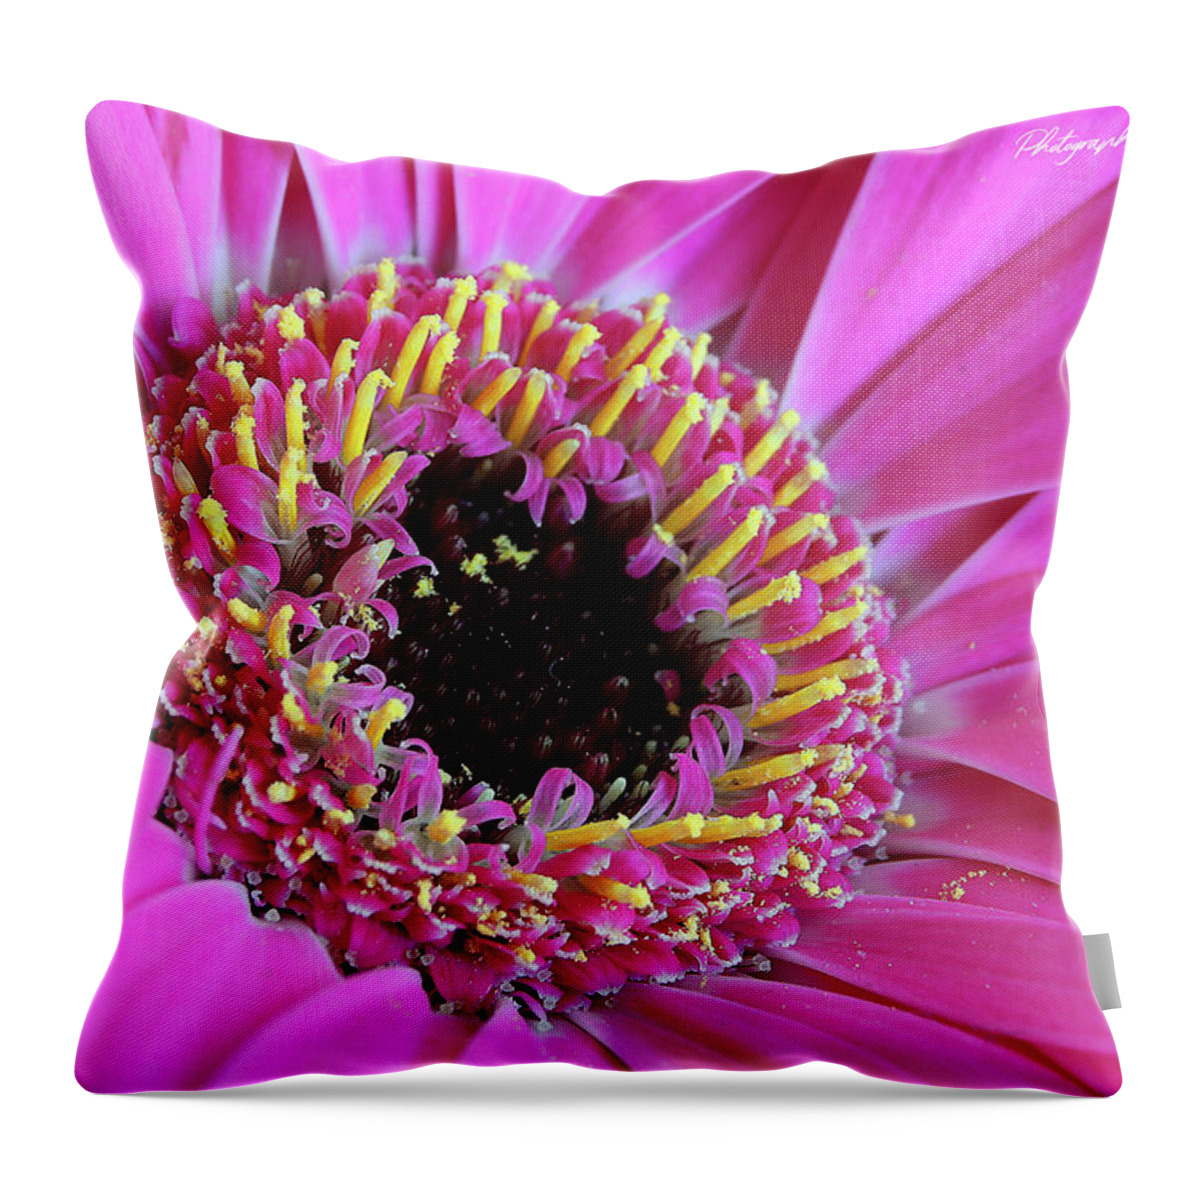 Flowers Throw Pillow featuring the digital art Pink 59 by Kevin Chippindall